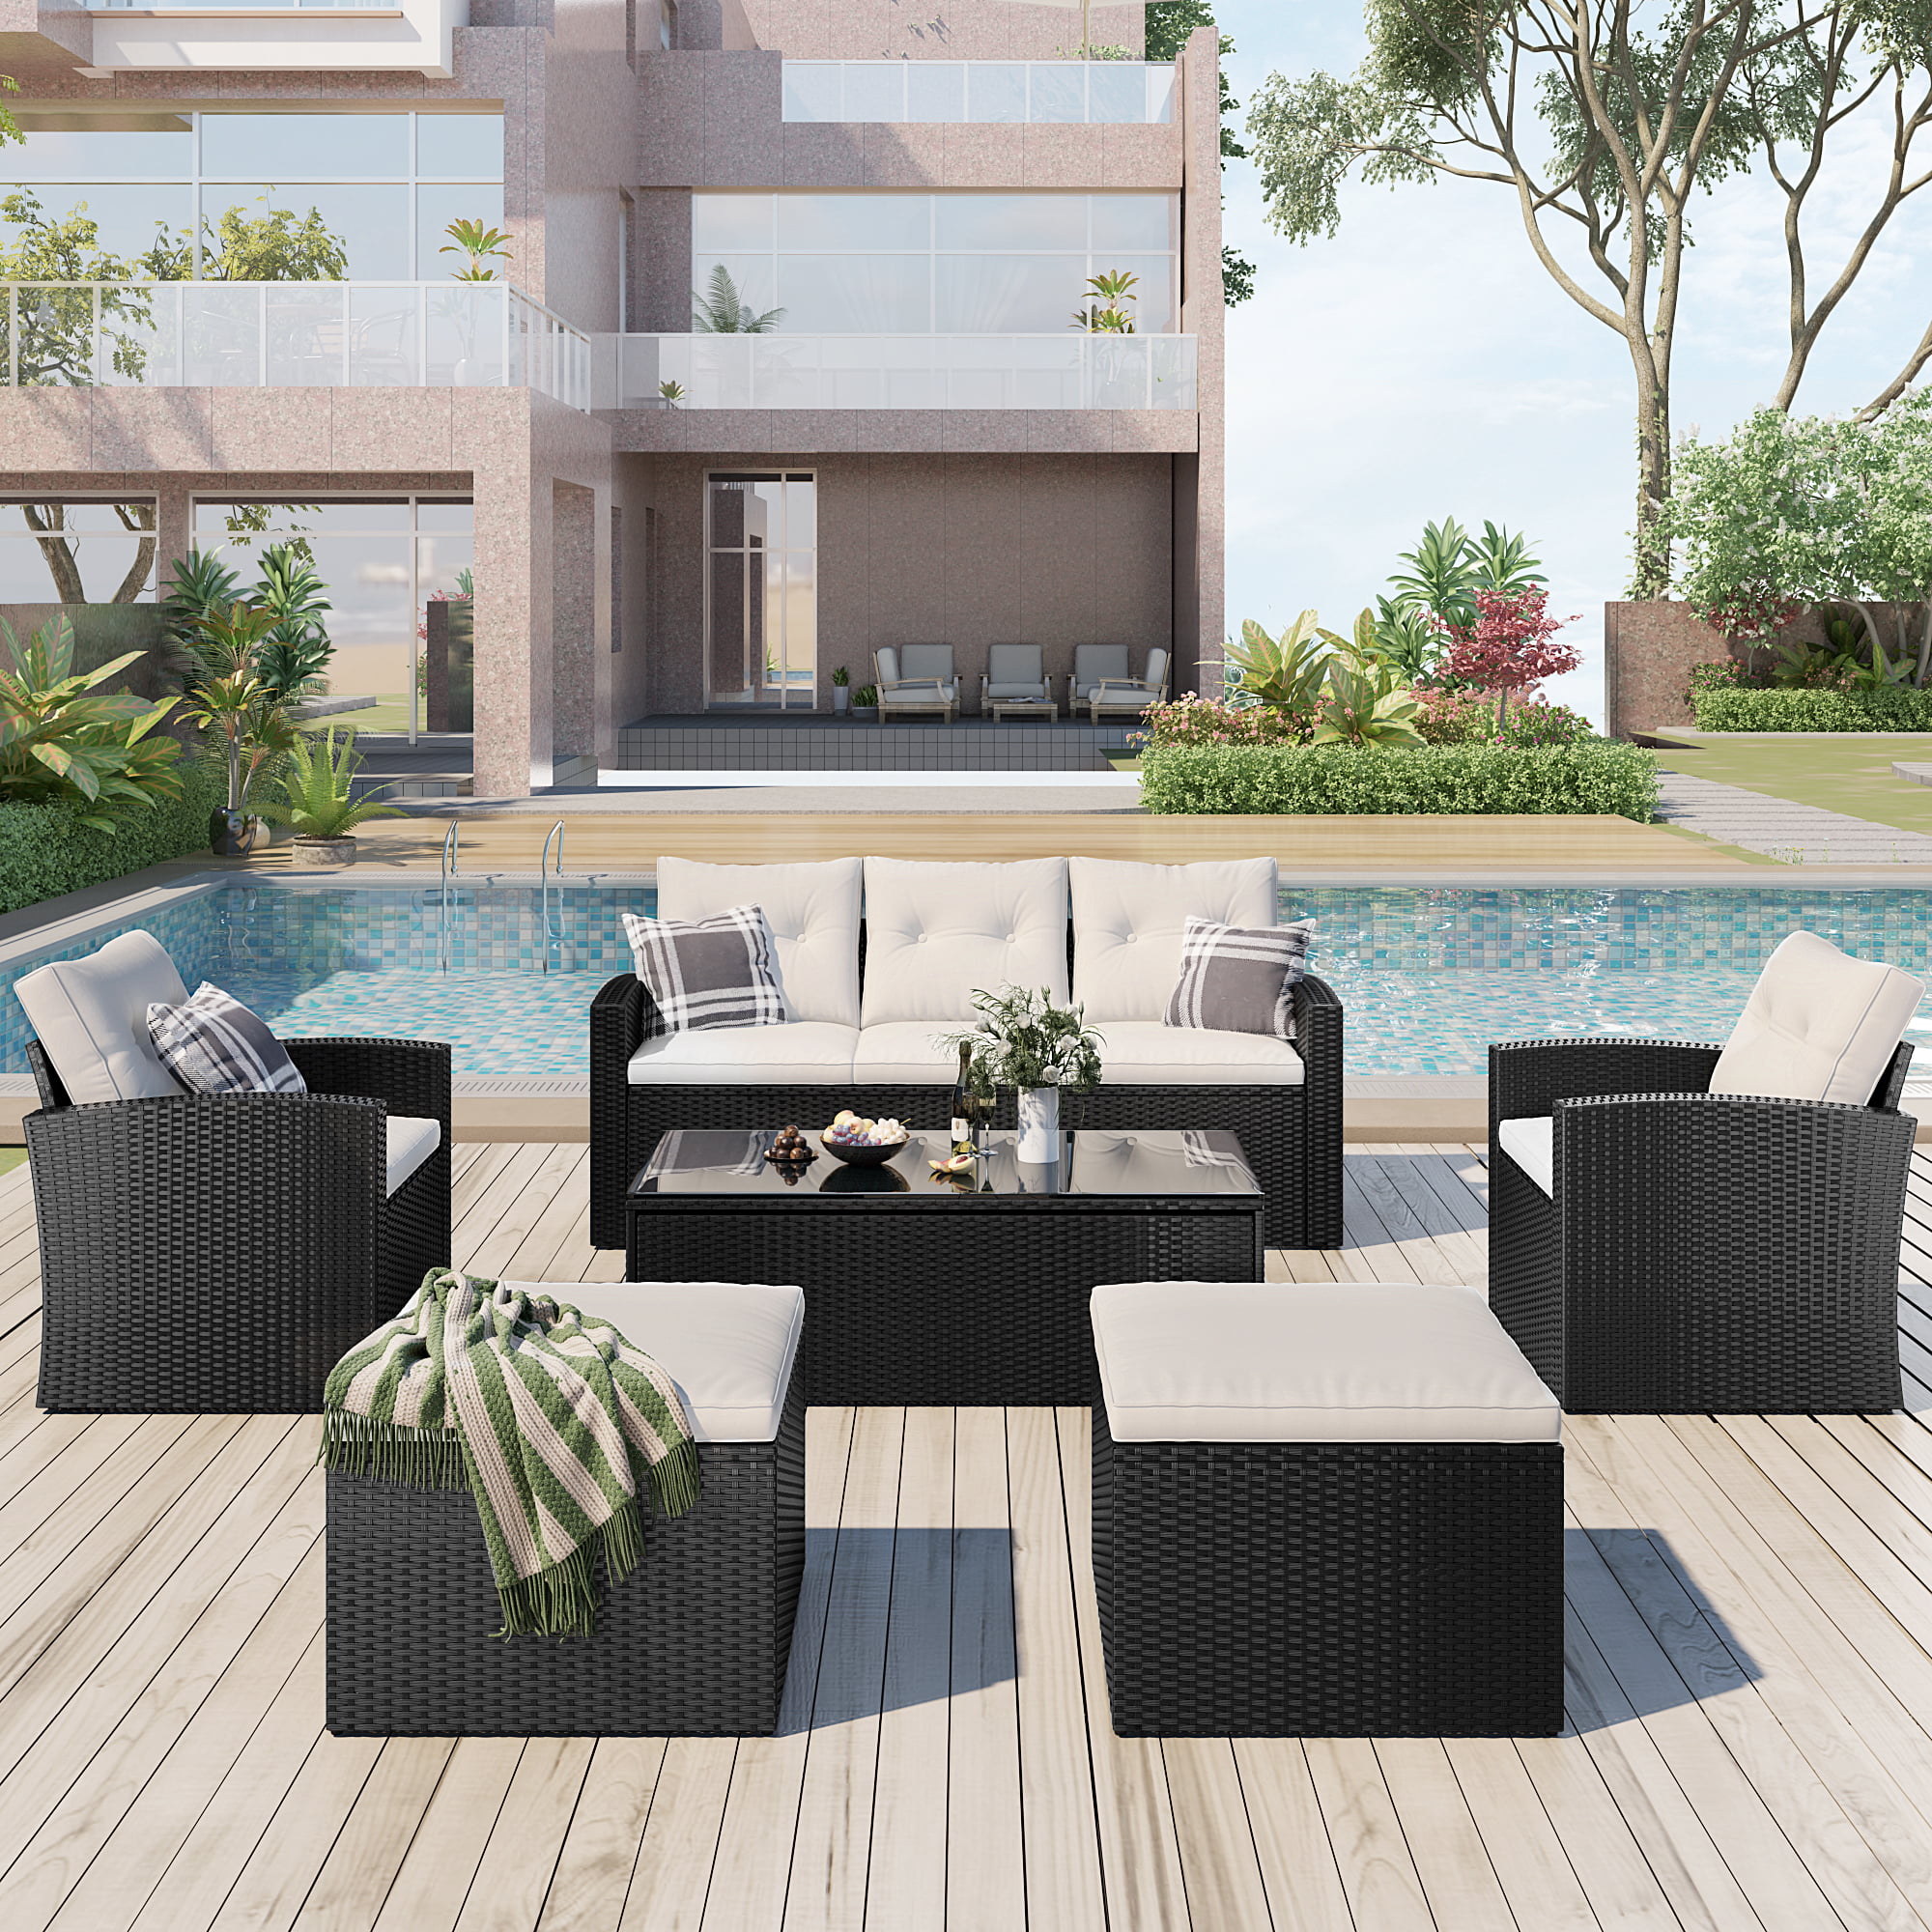 6 Piece Patio Sectional Sofa Set, Outdoor Conversation Set, All-Weather Wicker Sectional Seating Group with Cushions & Coffee Table, Modern Furniture Couch Set for Patio Deck Garden Pool, Beige - image 1 of 9